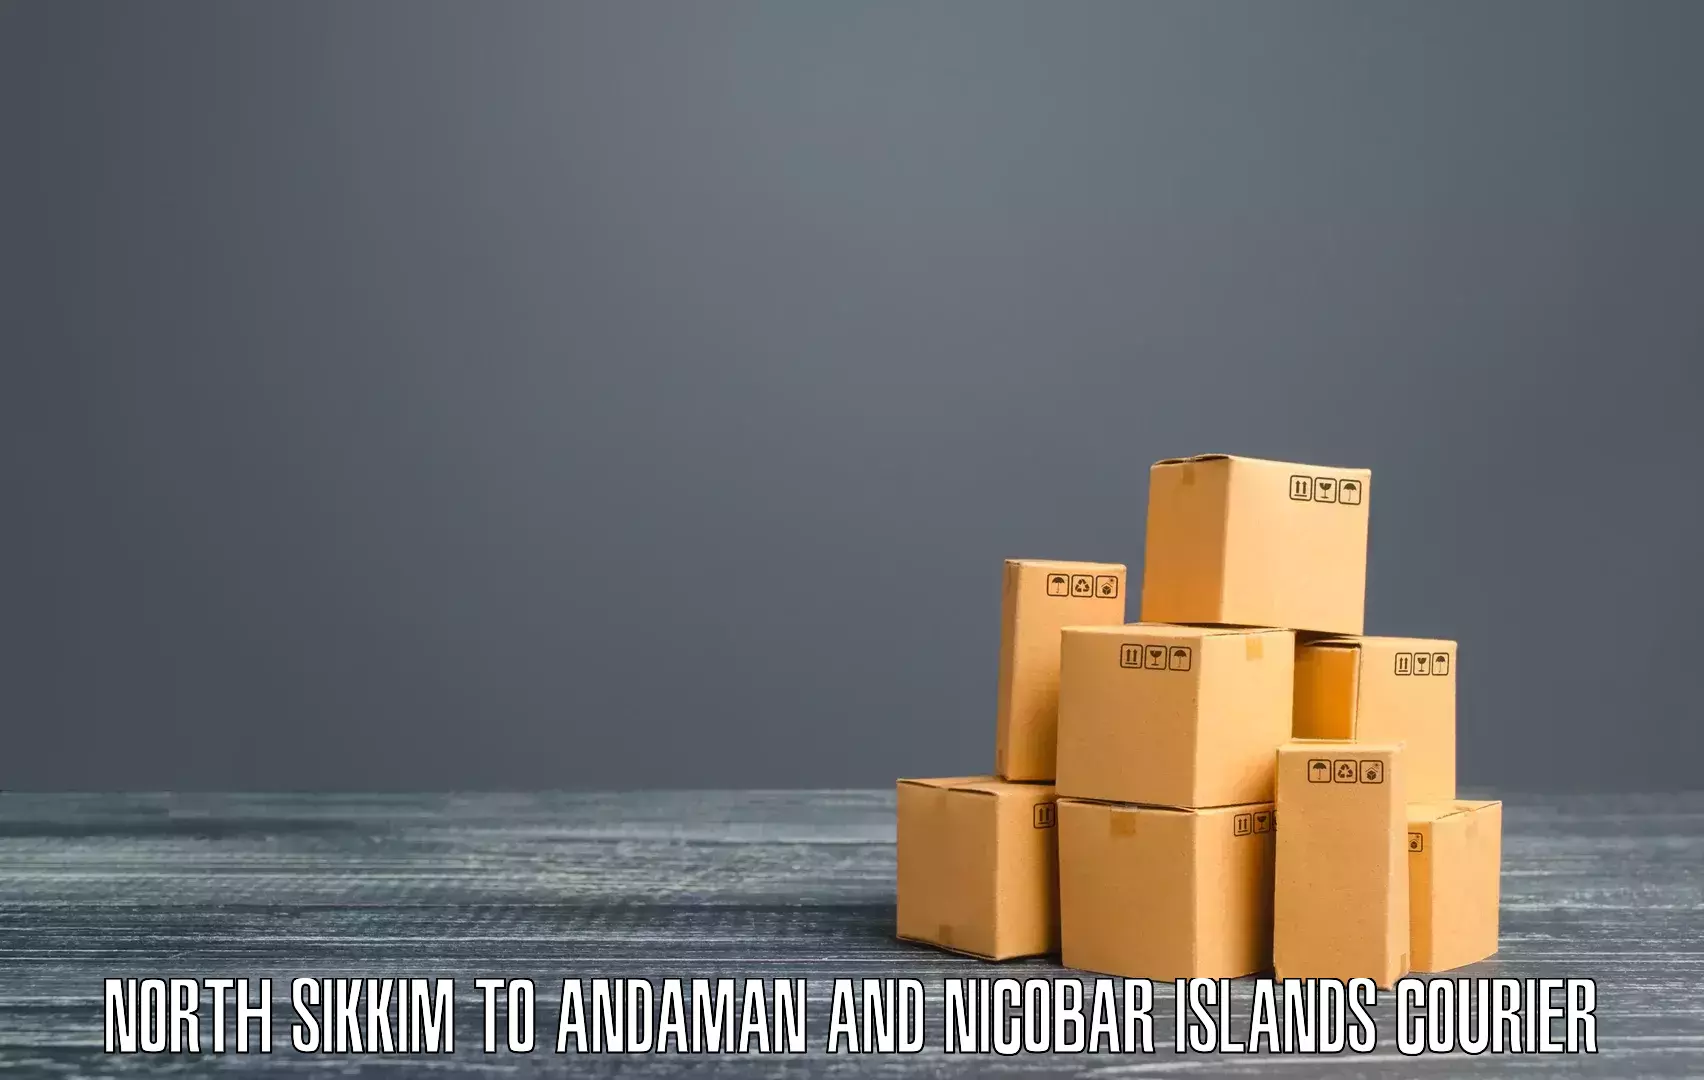 Express package handling North Sikkim to Andaman and Nicobar Islands